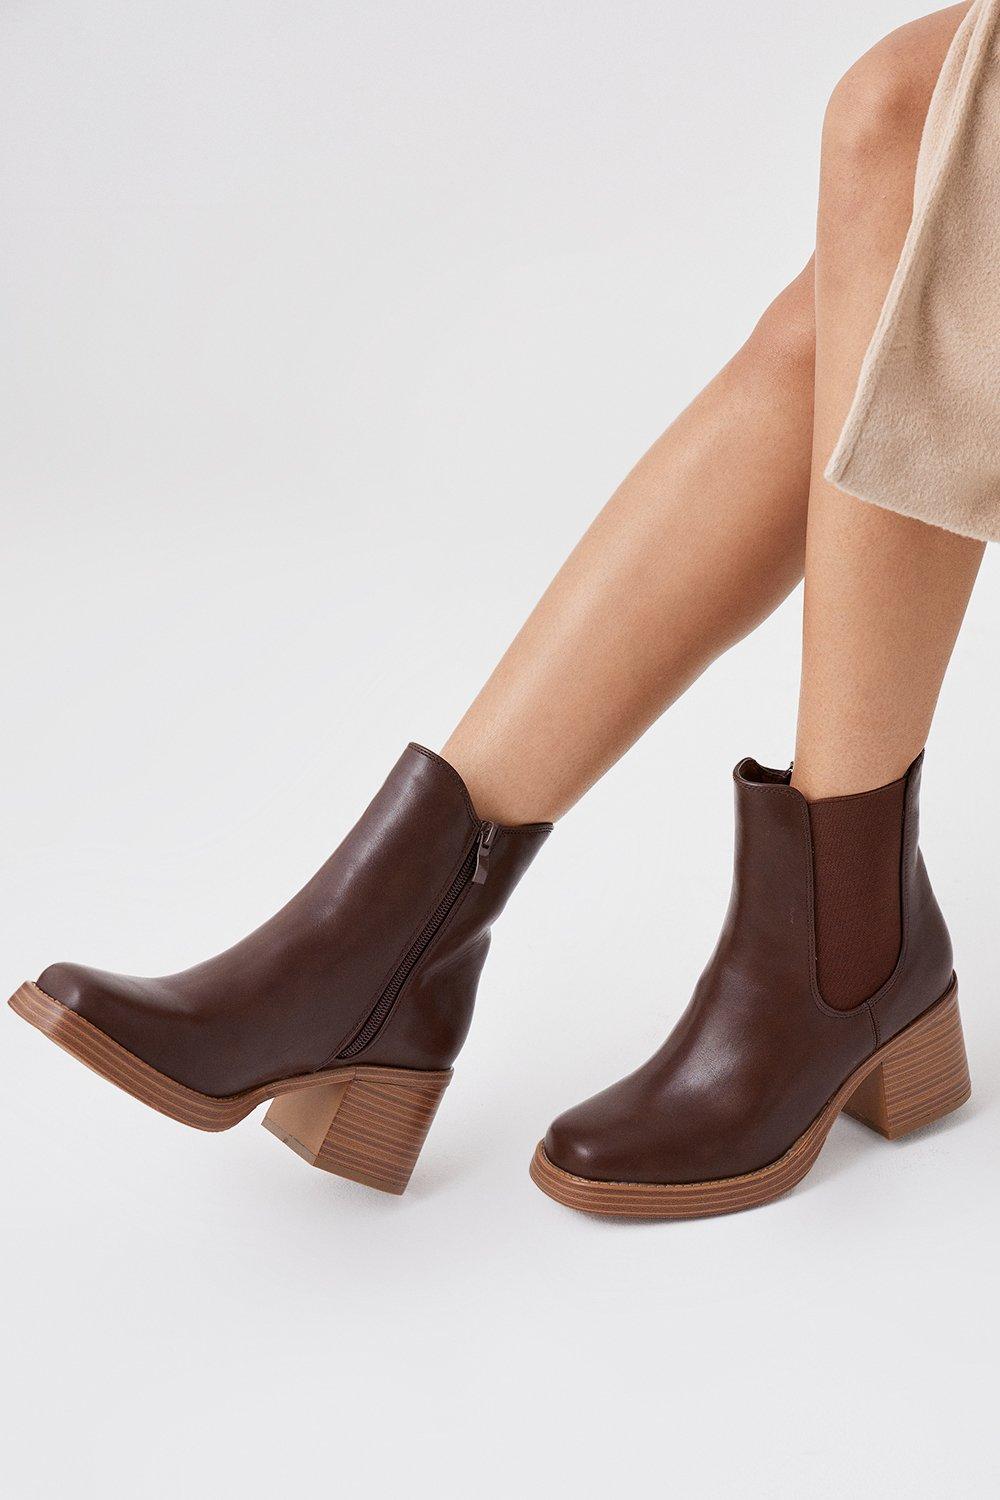 Women’s Faith: Alberta Square Toe Stack Heel Ankle Boots - brown - 8